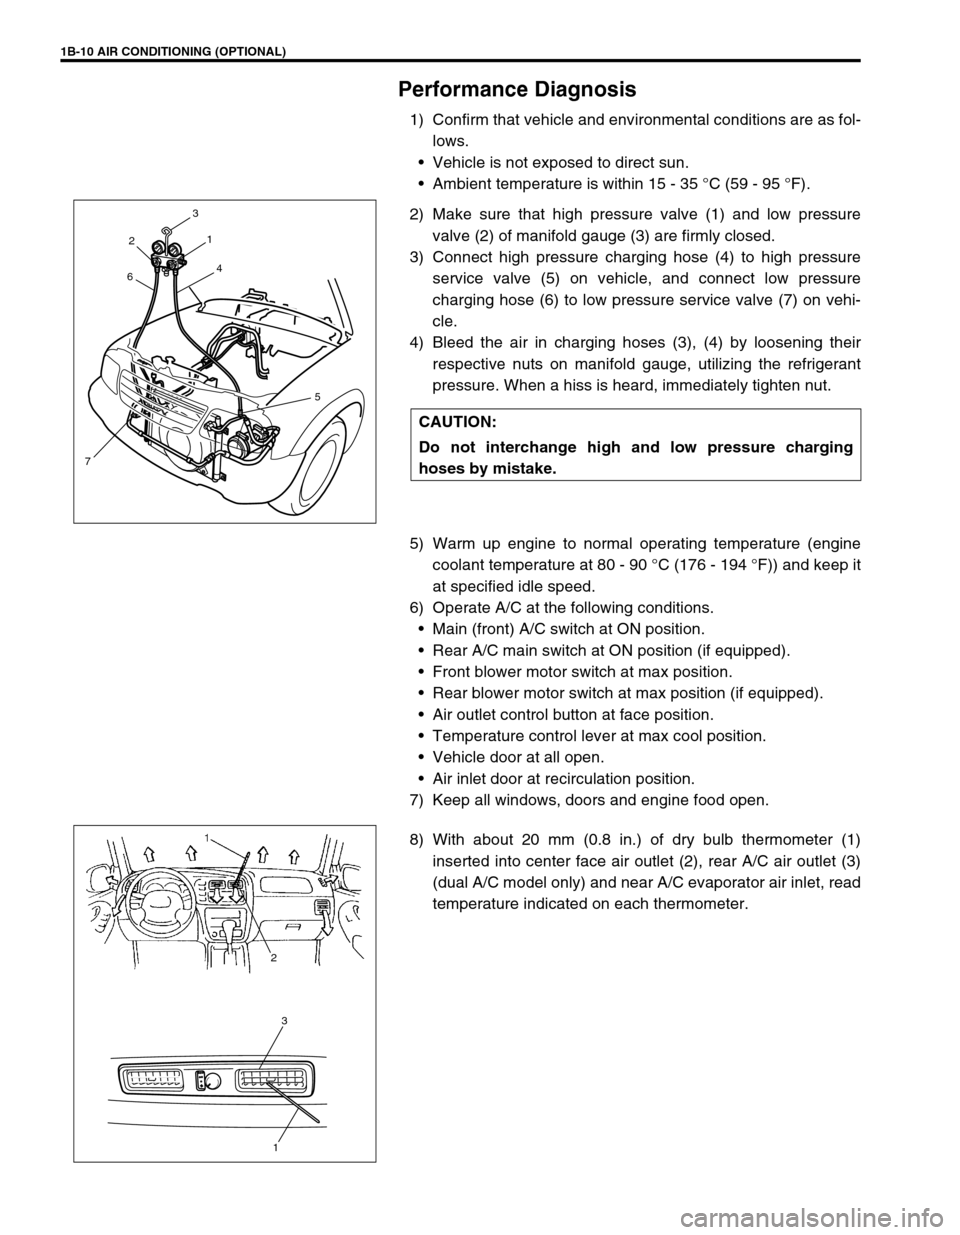 SUZUKI GRAND VITARA 1999 2.G Owners Guide 1B-10 AIR CONDITIONING (OPTIONAL)
Performance Diagnosis
1) Confirm that vehicle and environmental conditions are as fol-
lows. 
Vehicle is not exposed to direct sun. 
Ambient temperature is within 1